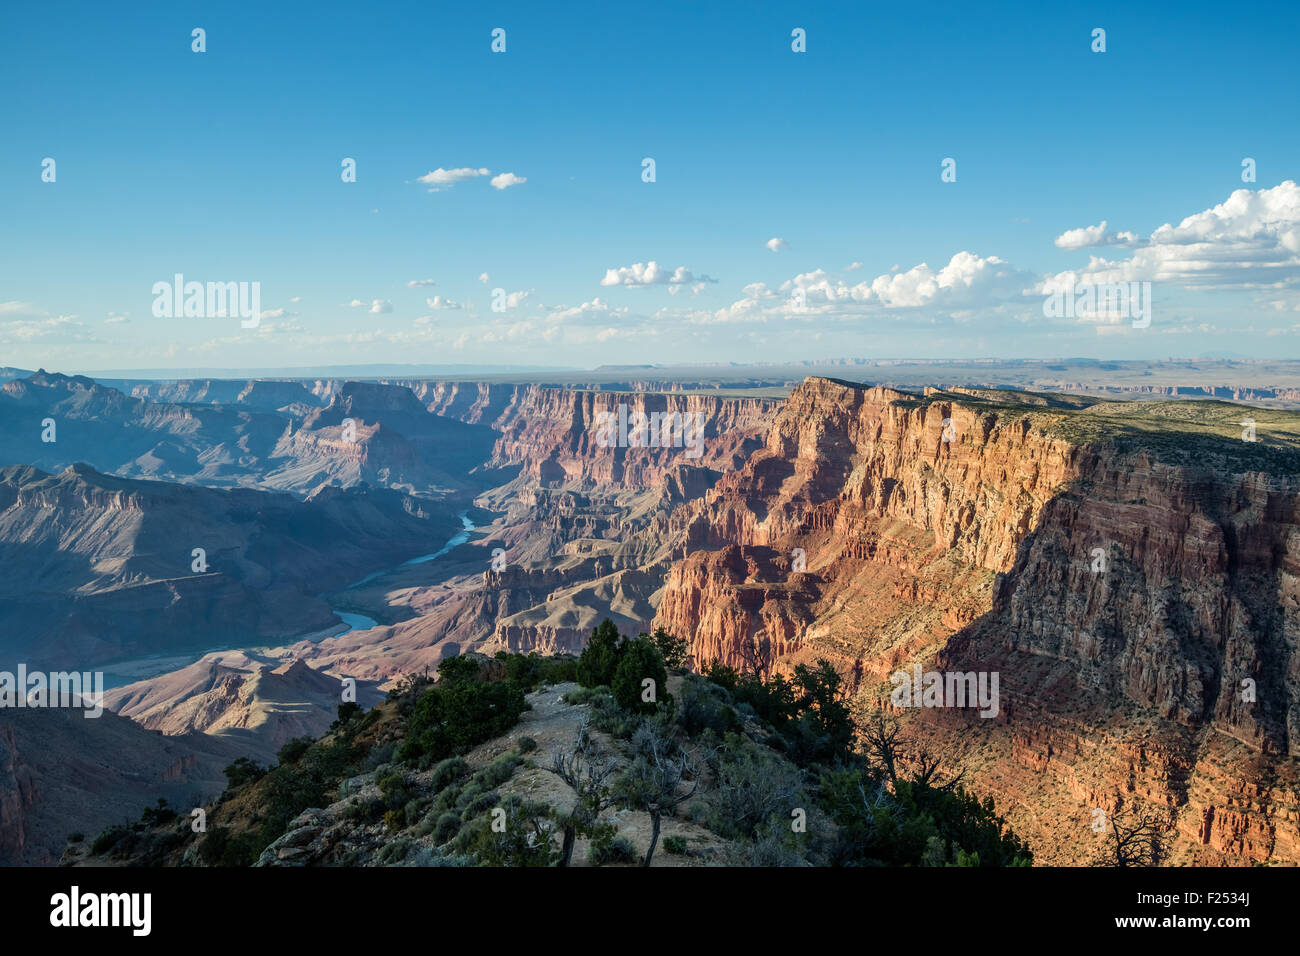 Beautiful view of the Grand Canyon National Park from the South Rim, Arizona, USA Stock Photo